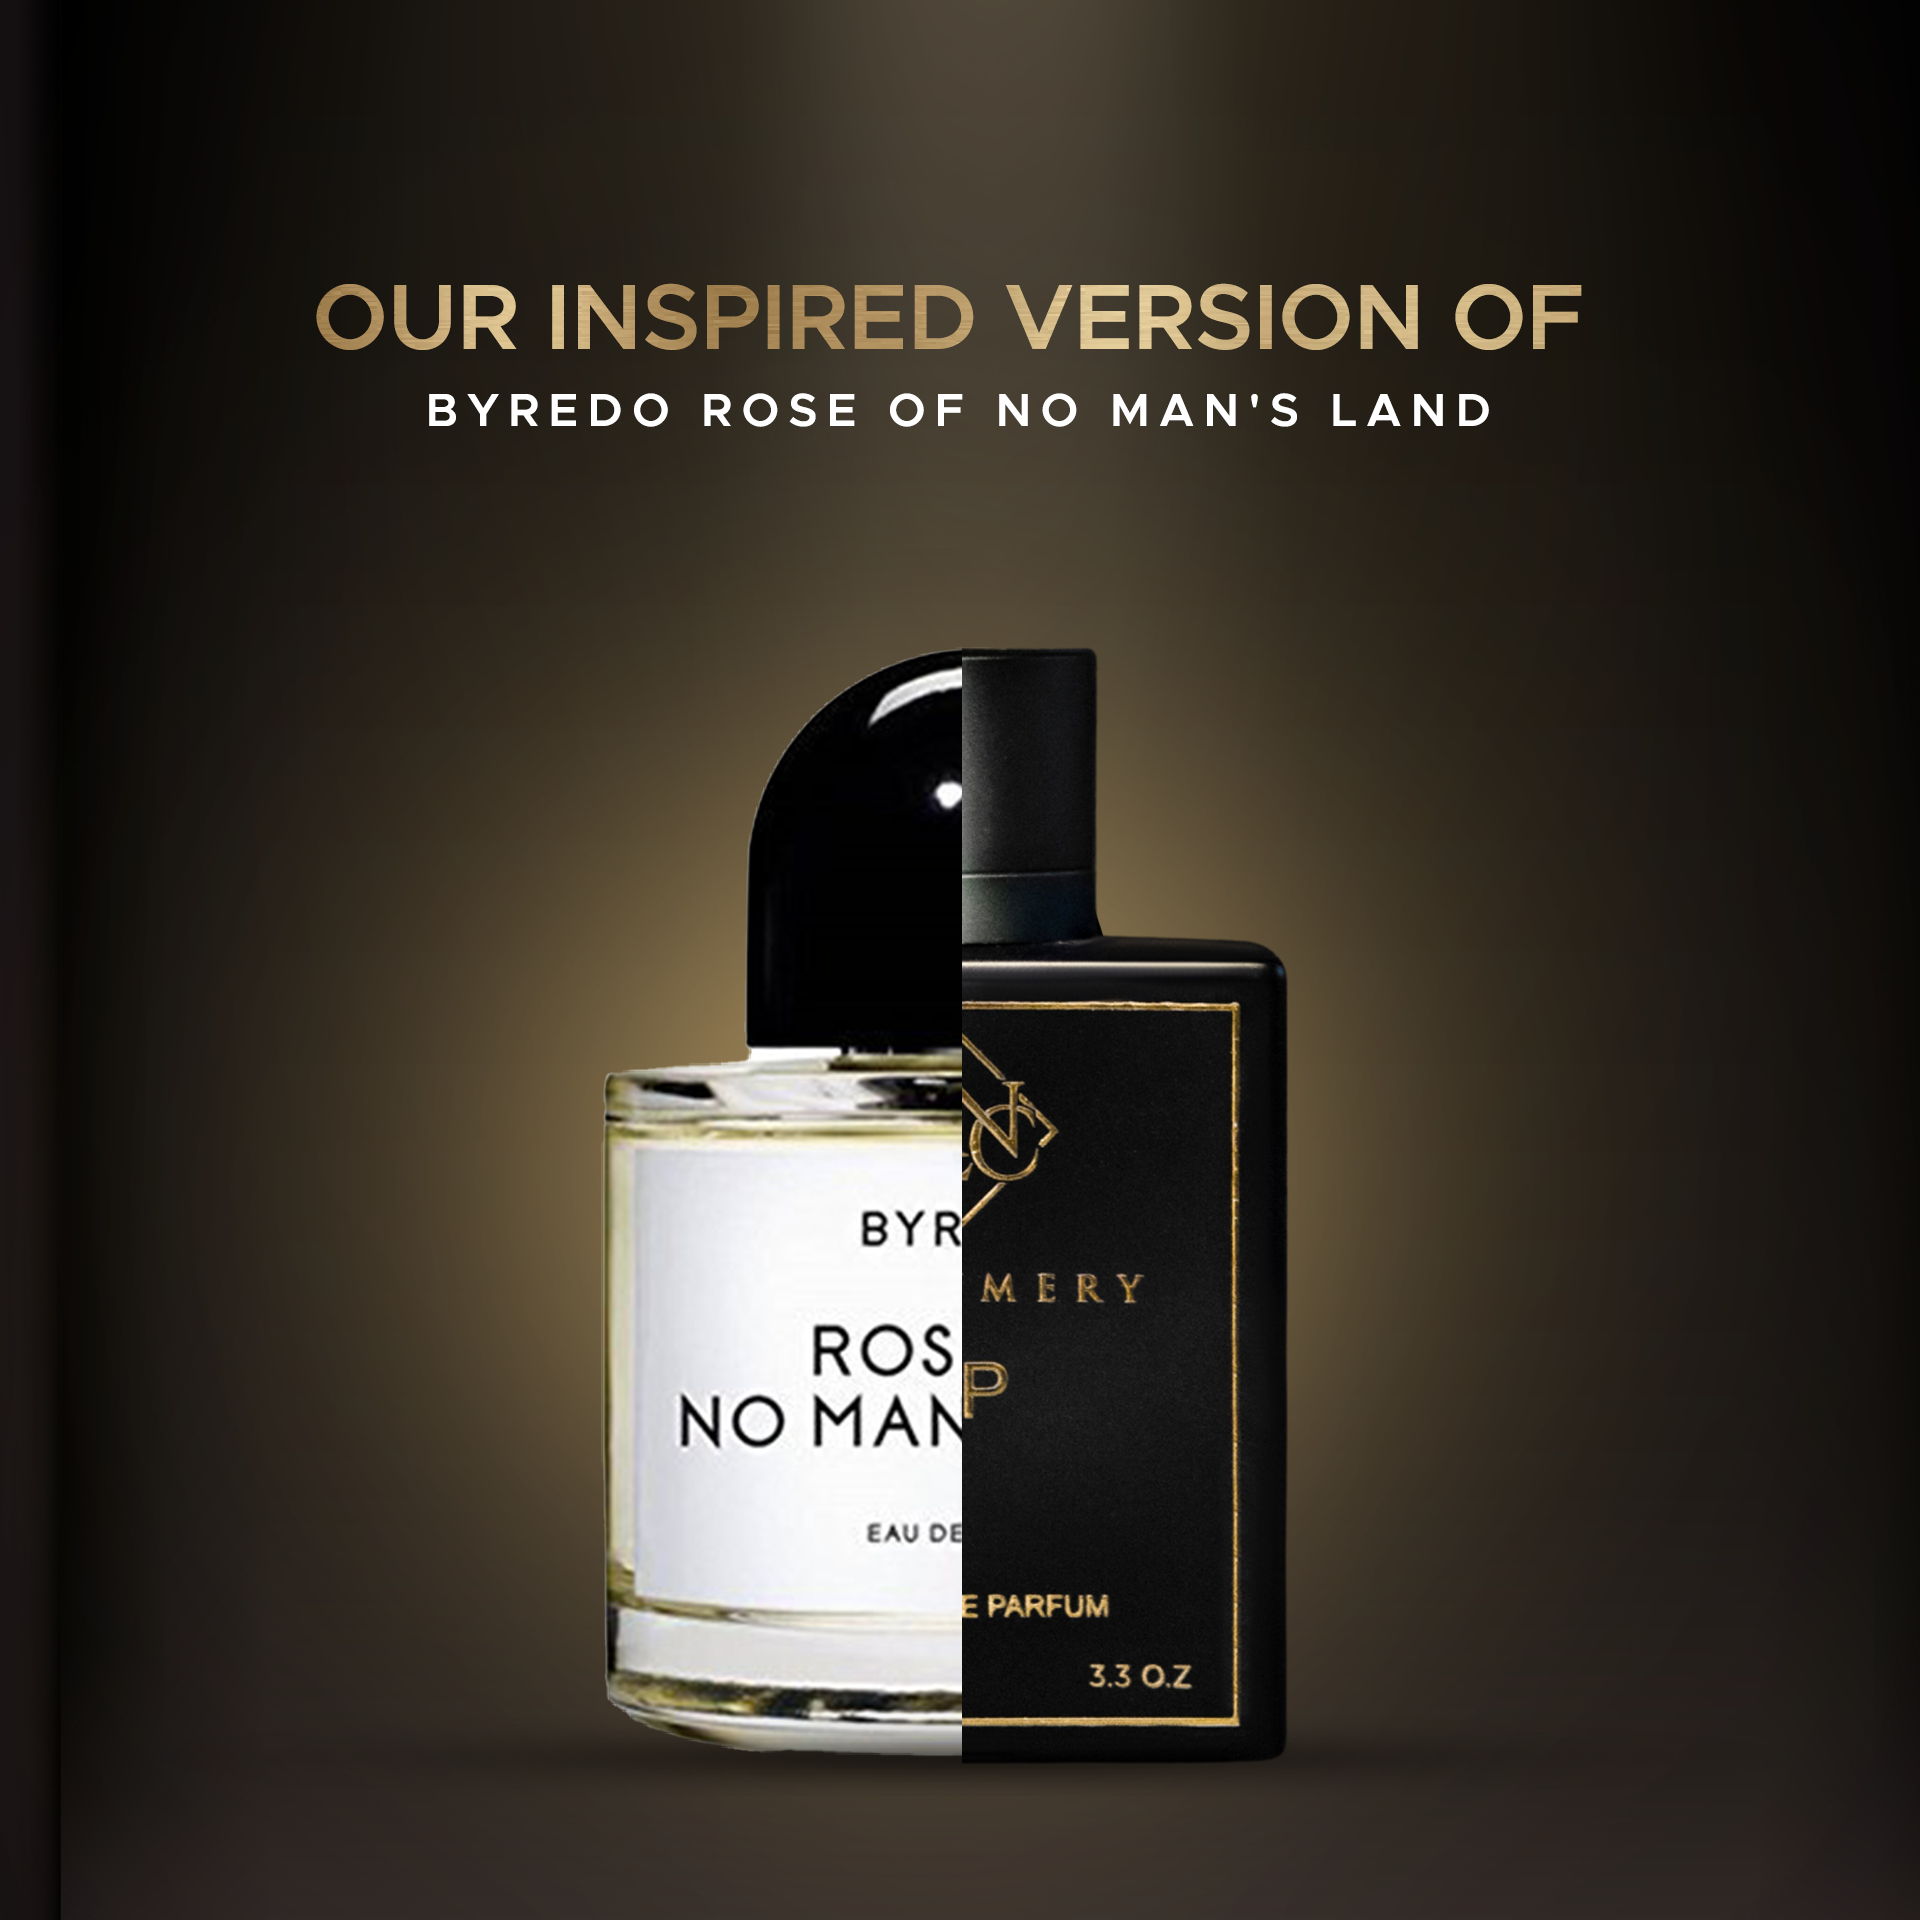 Shop XP178 Inspired Perfume by Rose of No Man's Land, Rose of No Man's Land inspired perfume, Rose of No Man's Land notes, Rose of No Man's Land Fragrantica, Rose of No Man's Land 100ml, Rose of No Man's Land 60ml, Rose of No Man's Land 20ml, Rose of No Man's Land price, Rose of No Man's Land price in India, Rose of No Man's Land dupe, Inspired perfume, Perfume, Perfume for men, Perfume for women.